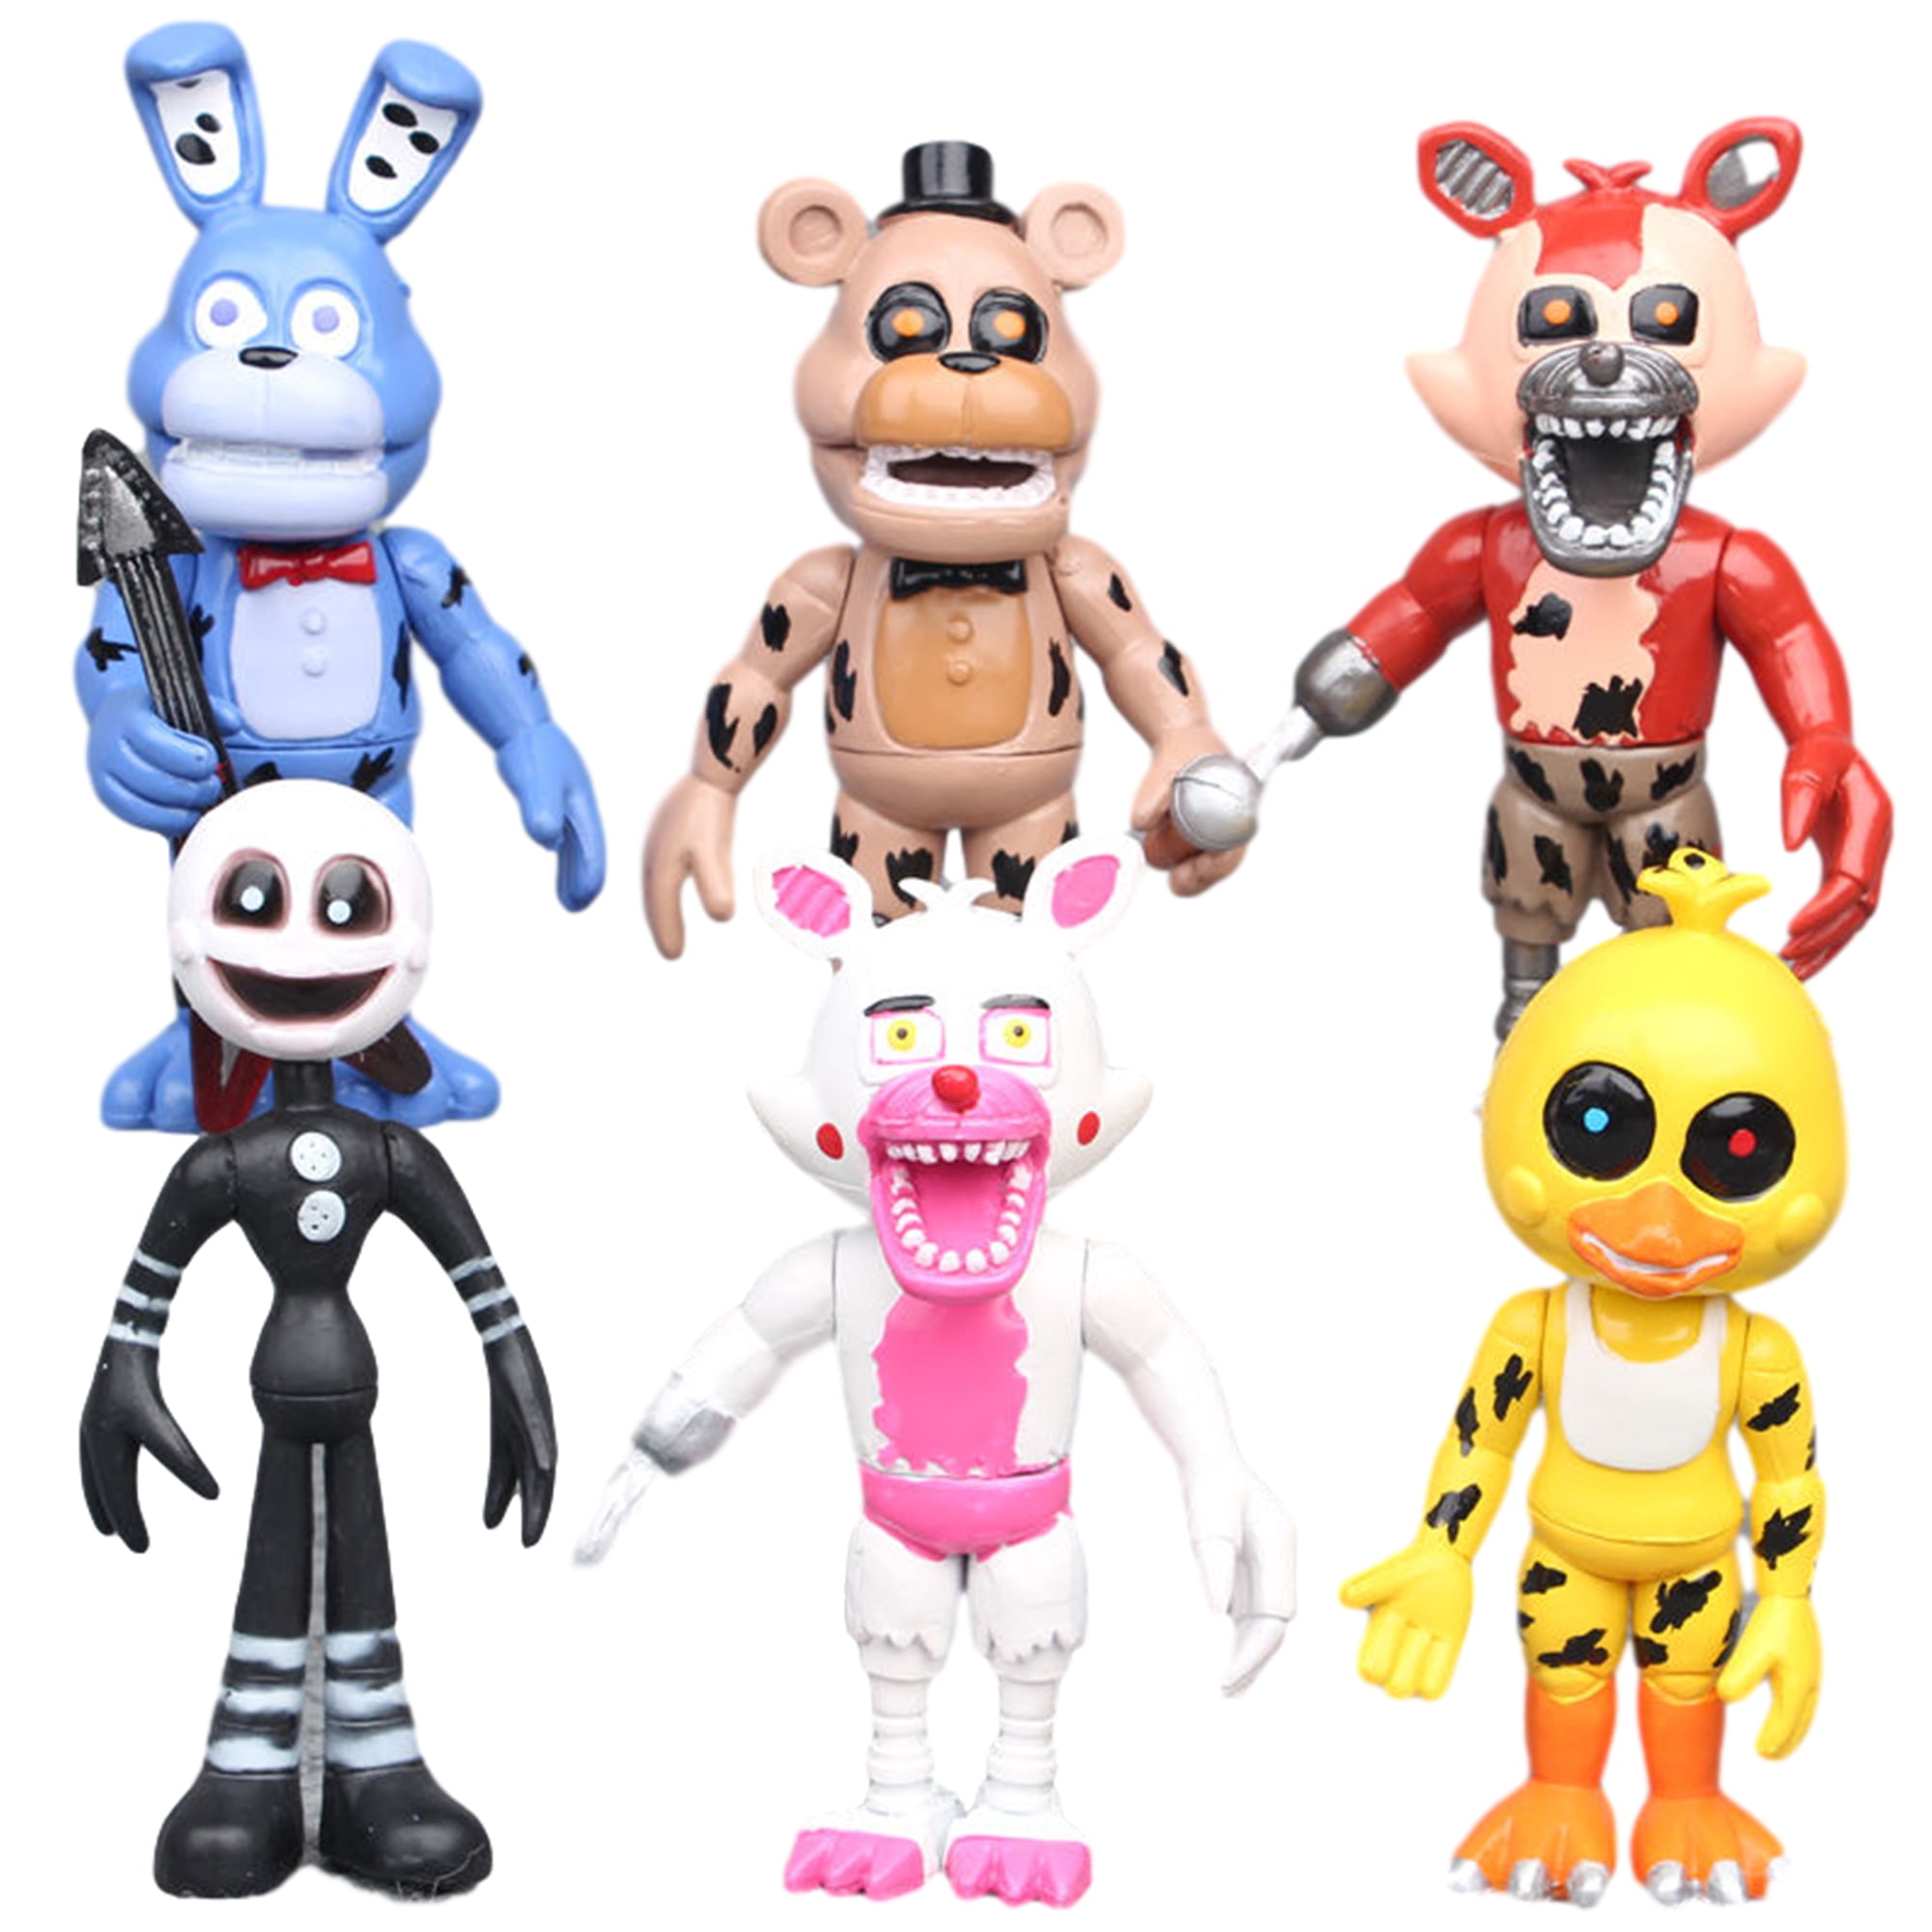 Five Nights at Freddys Chica plush toy 10cm